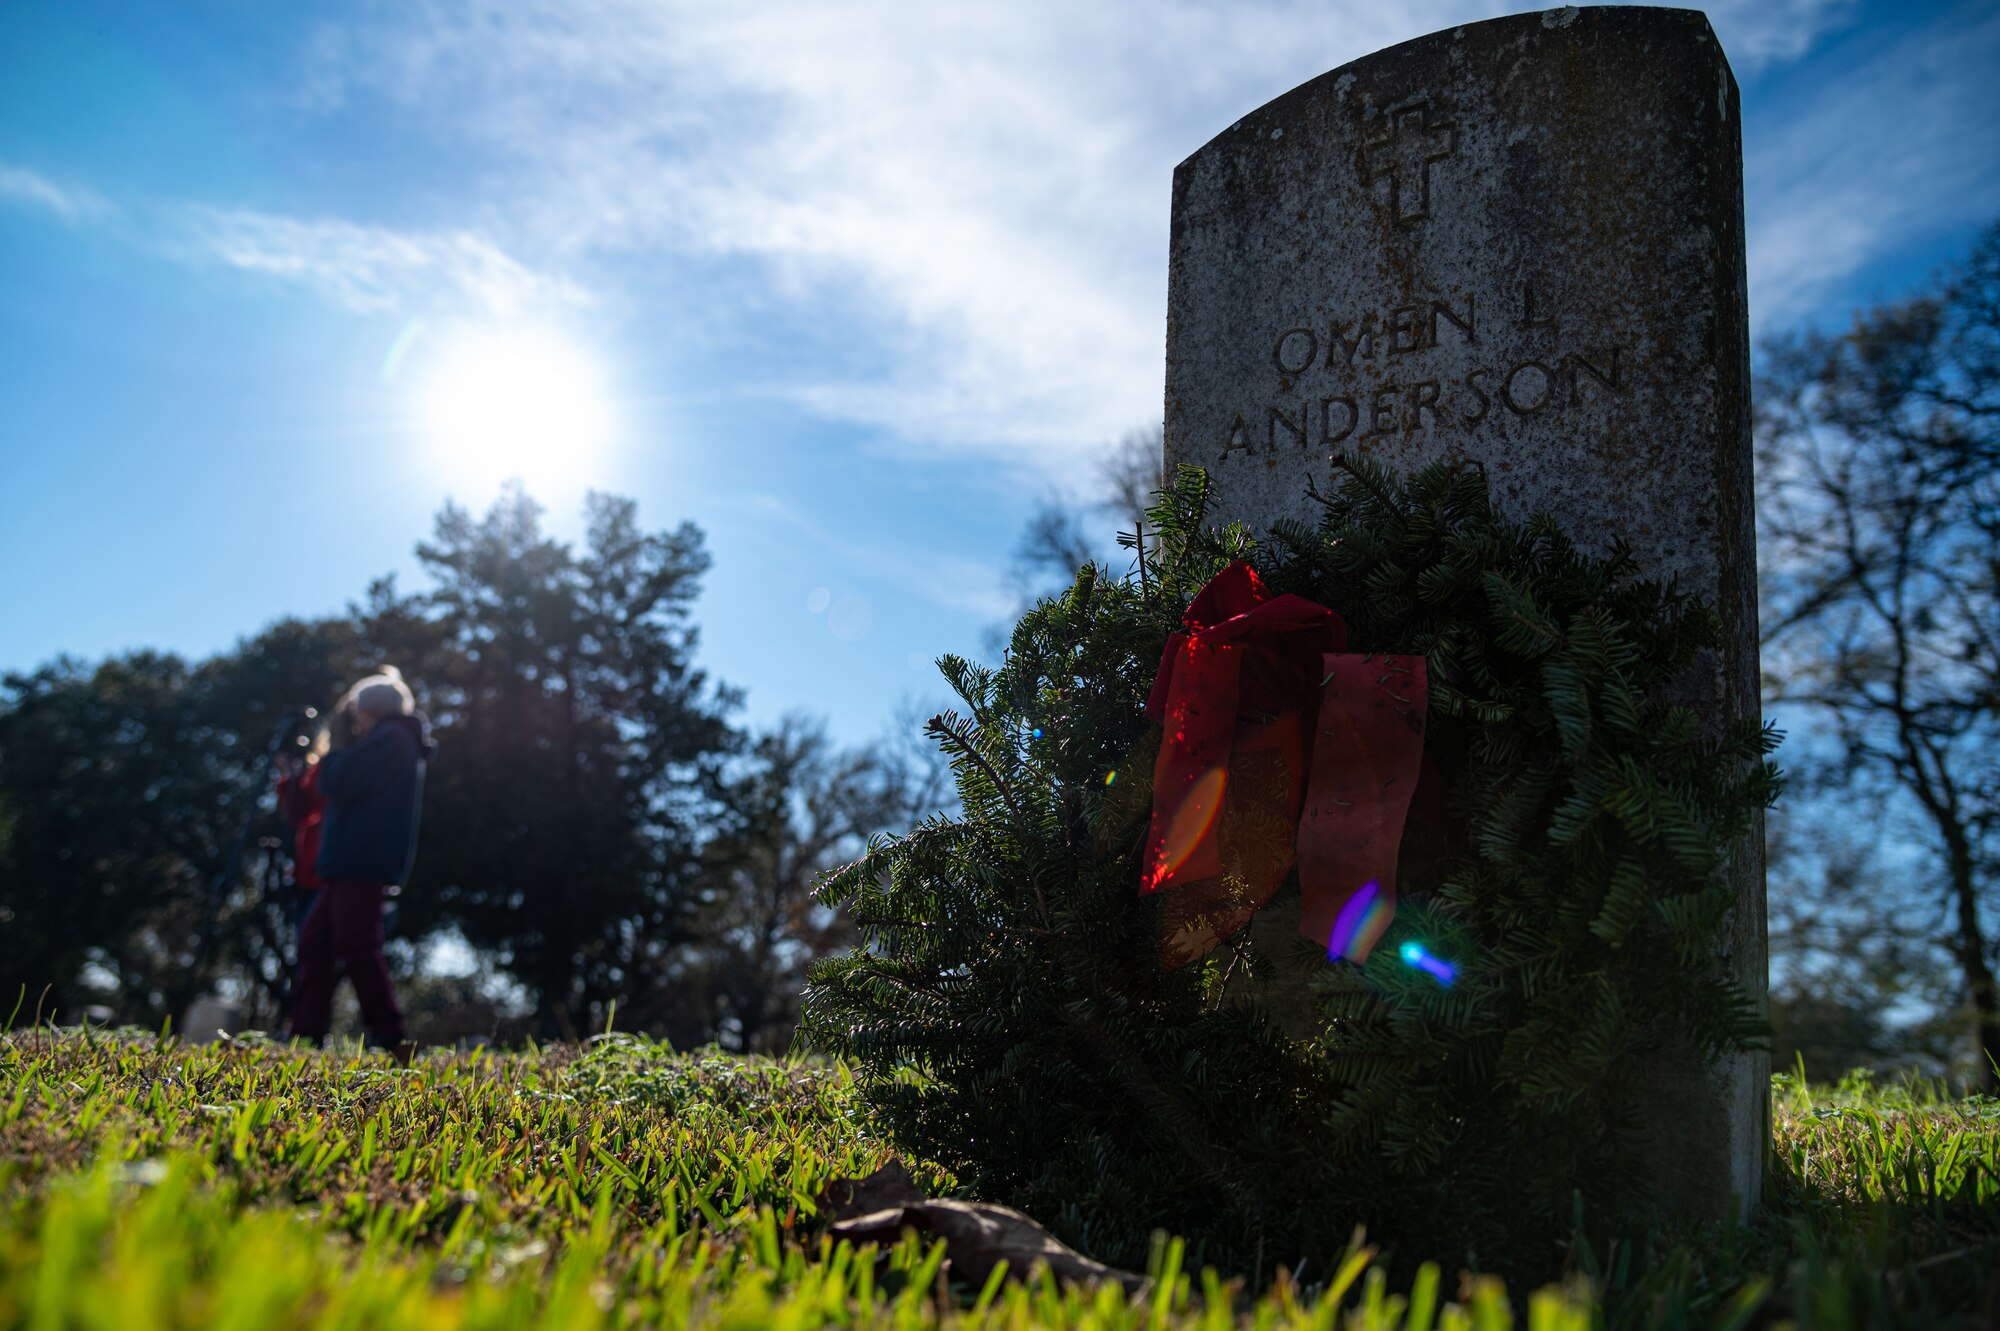 A wreath is laid upon the grave of a fallen veteran during a National Wreaths Across America ceremony at Bossier City, Louisiana, Dec. 19, 2021.